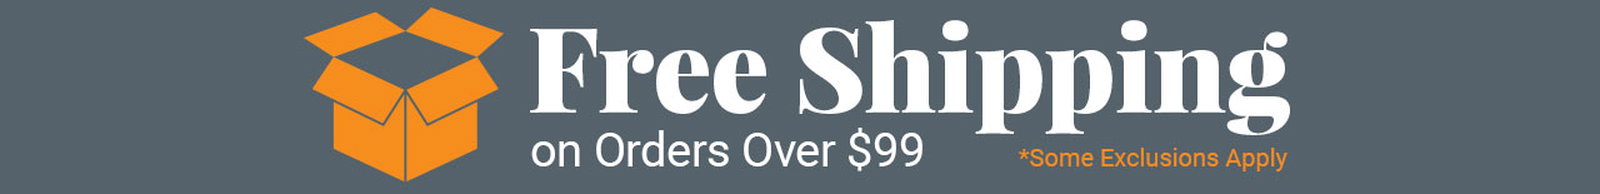 Free Shipping on orders Over \\$99